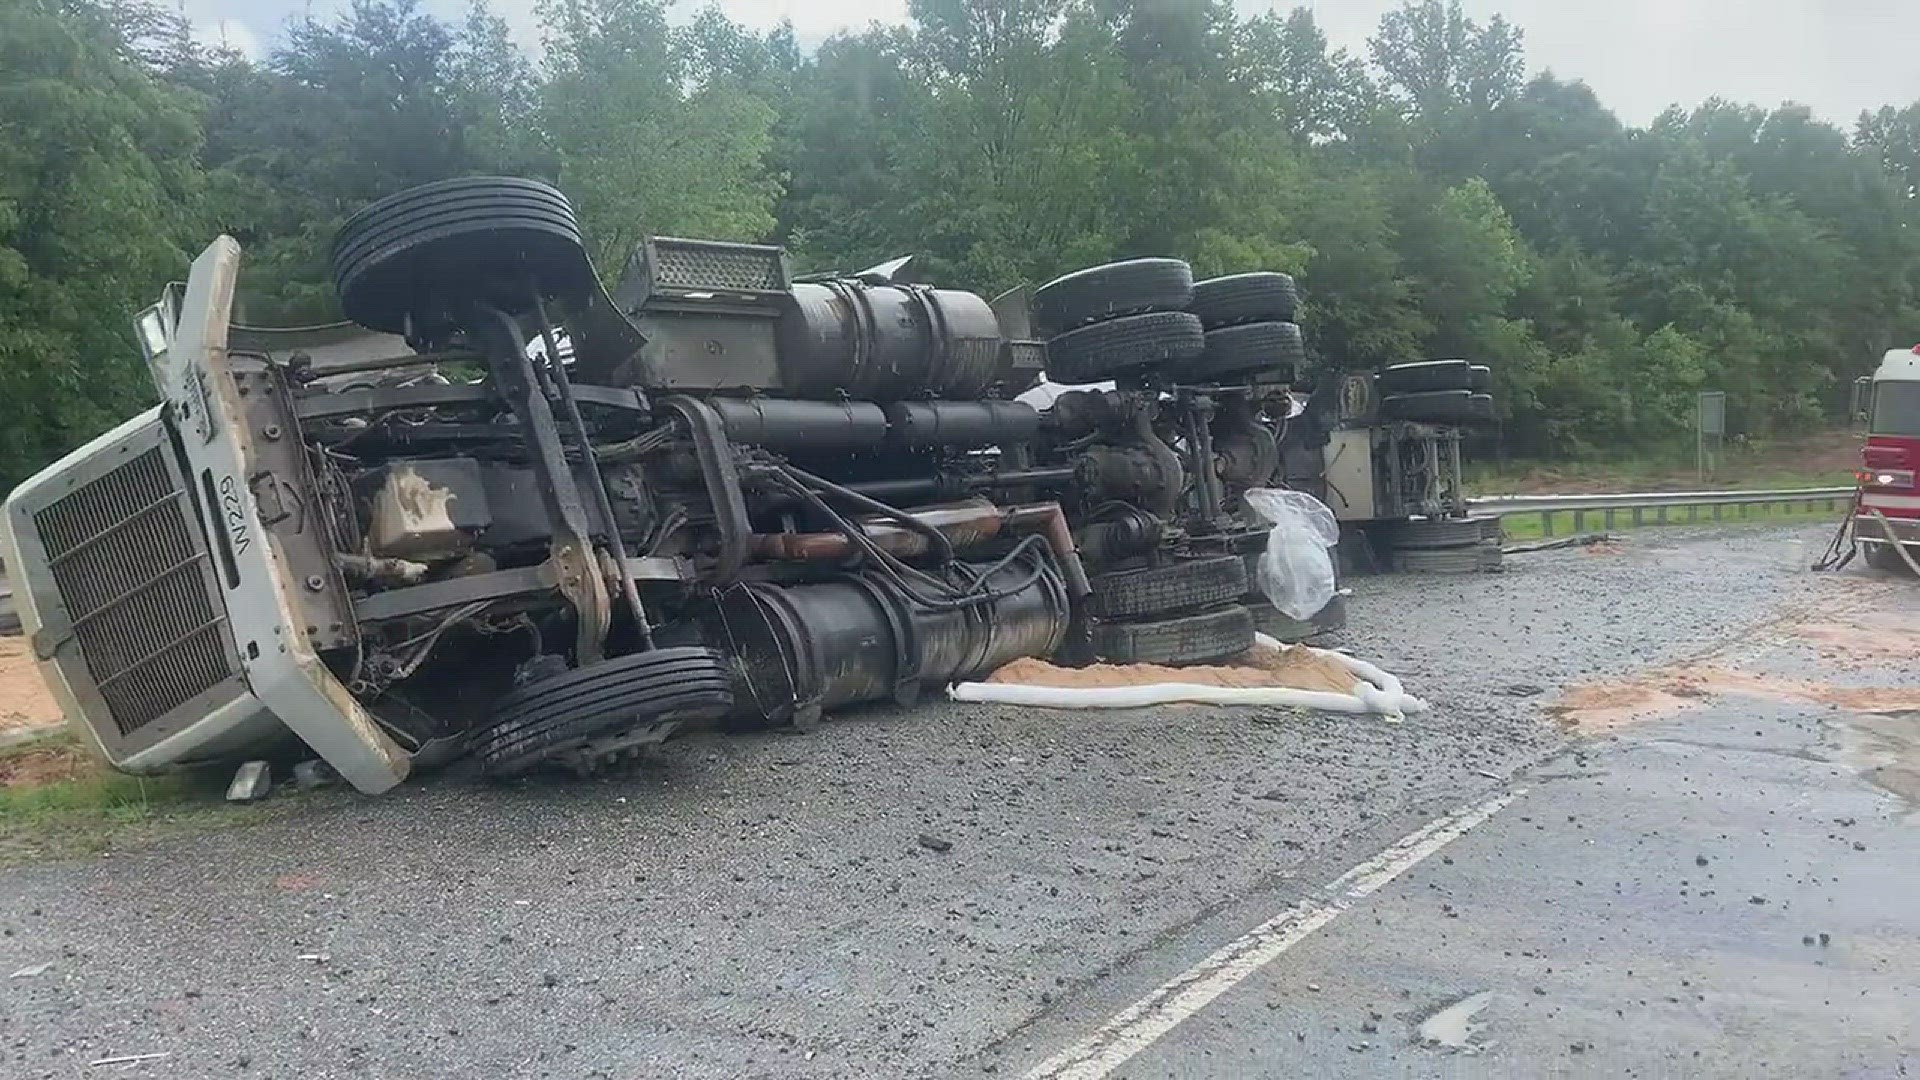 Winston-Salem fire crews are at the scene of an overturned tractor trailer with a gas spill in the road causing road closures